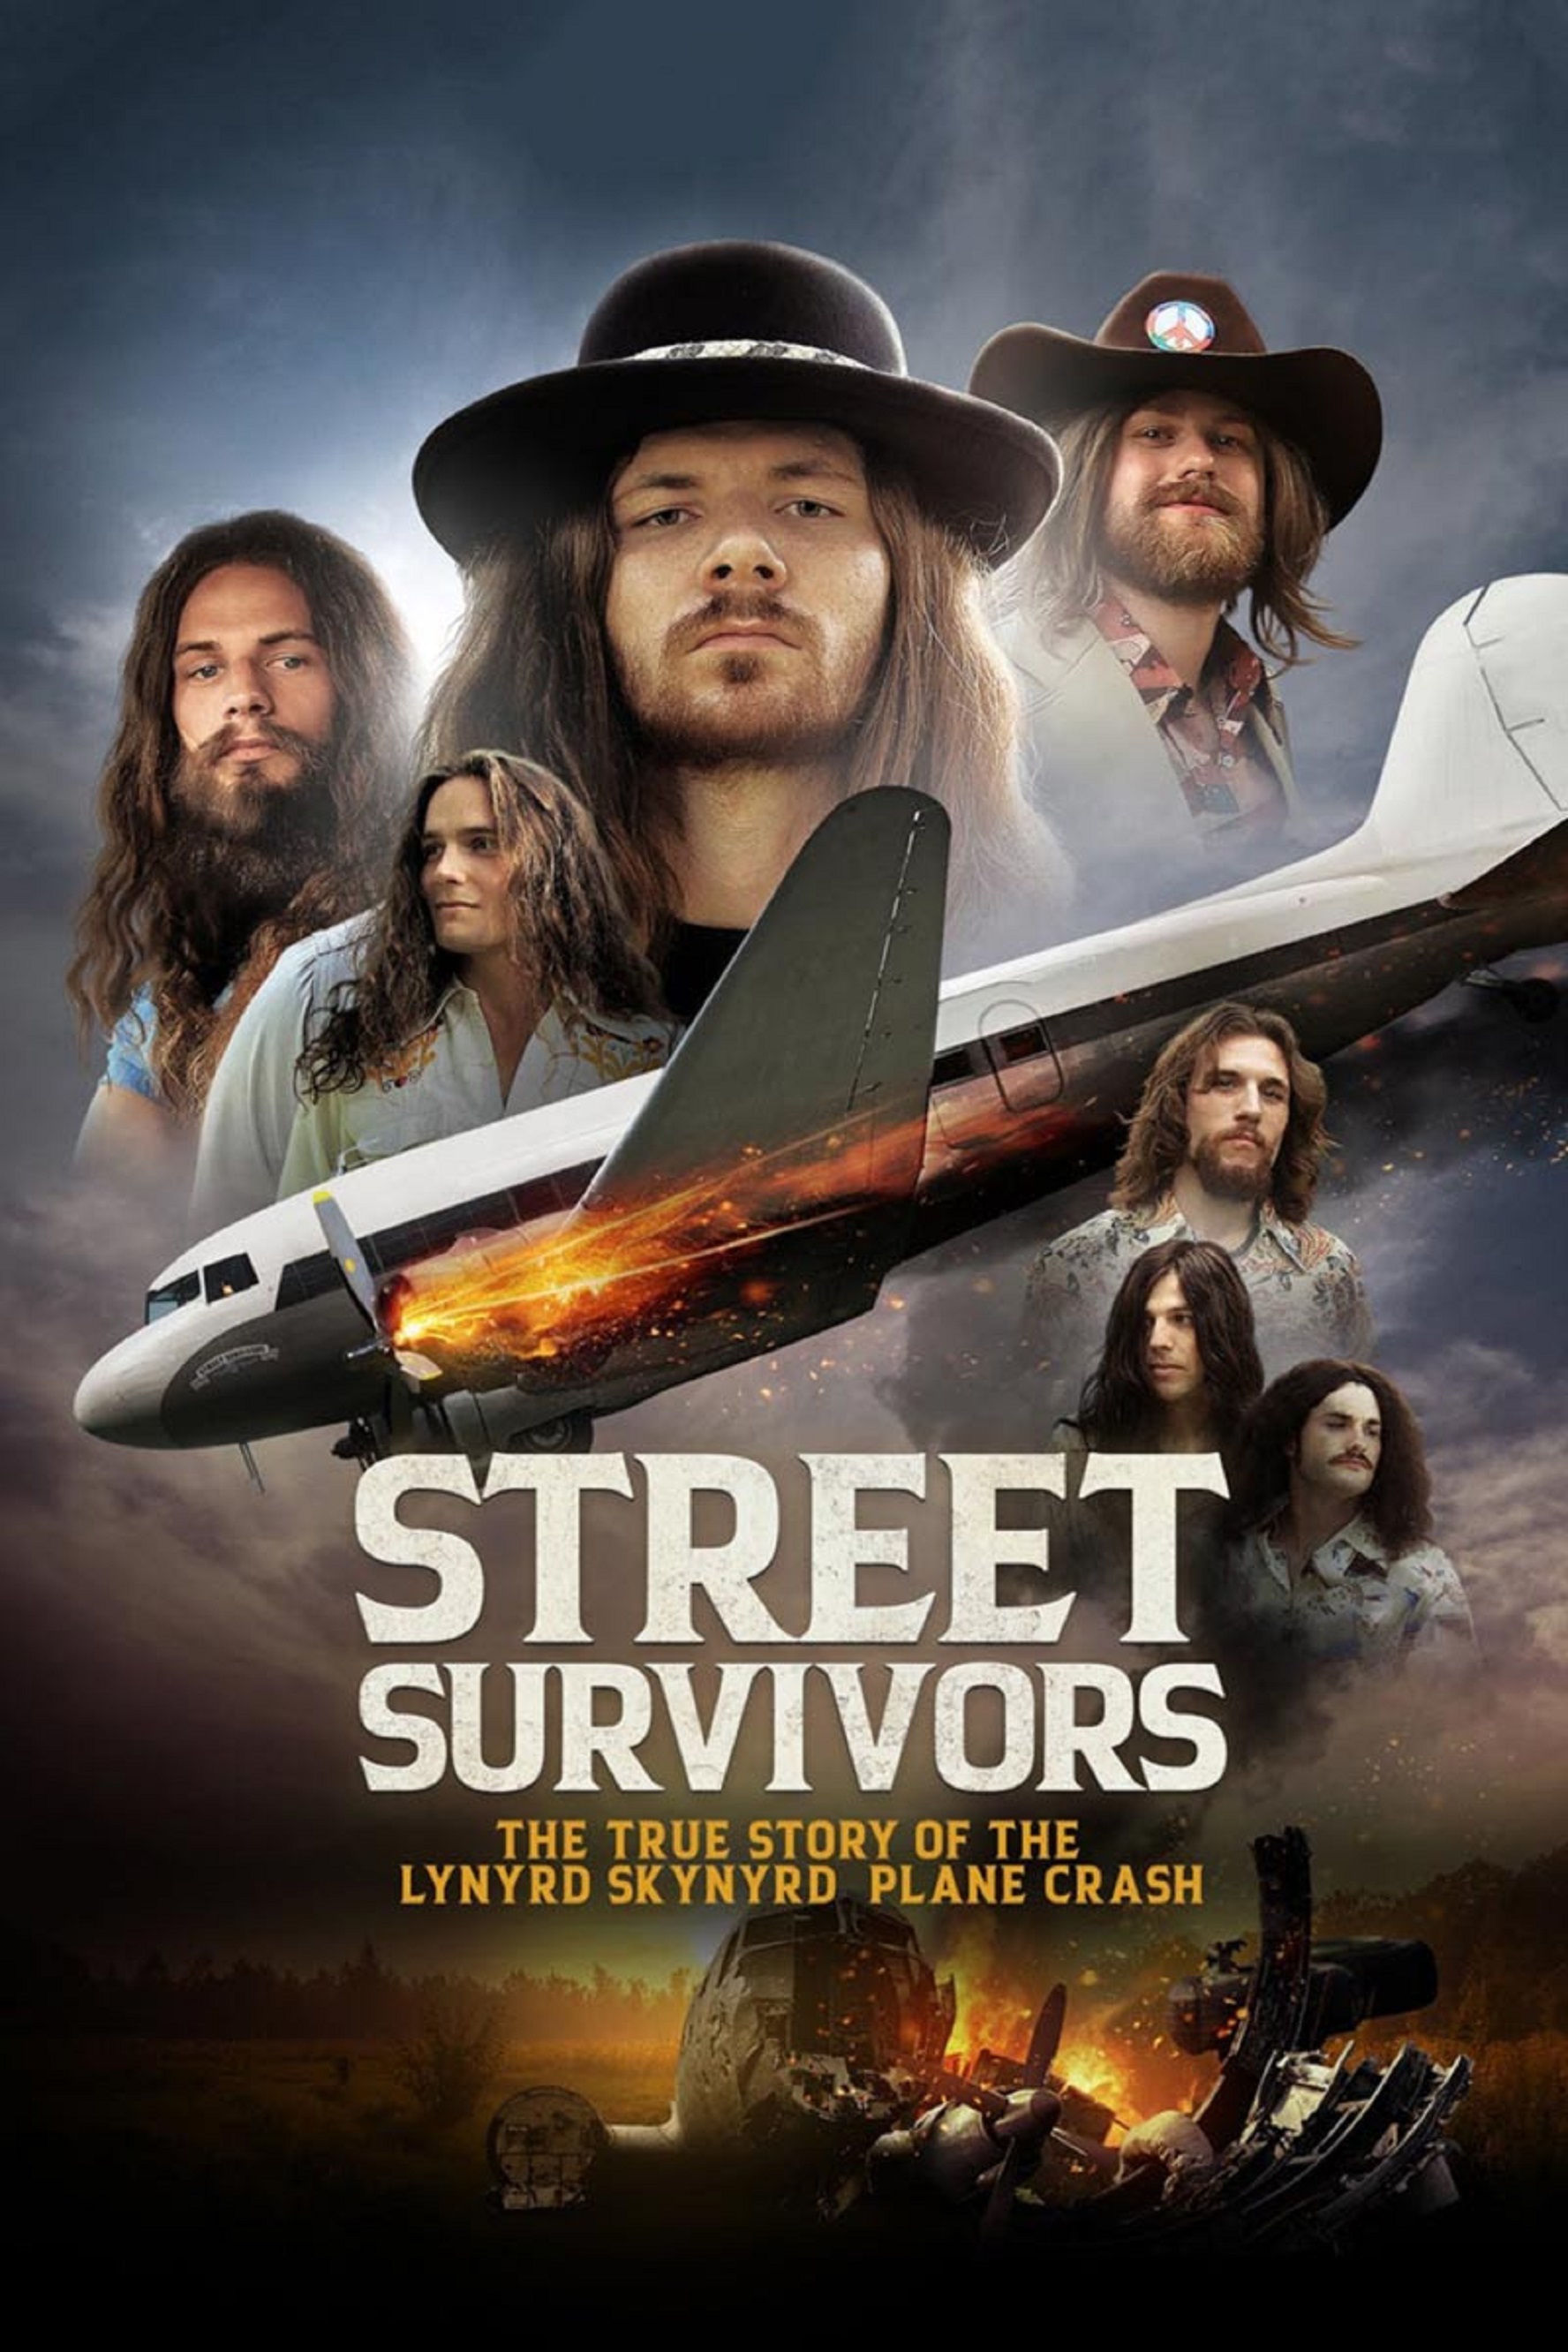 'STREET SURVIVORS: THE TRUE STORY OF THE LYNYRD SKYNYRD PLANE CRASH' IS AVAILABLE ON AMAZON PRIME VIDEO, BLU-RAY, DVD, AND MORE